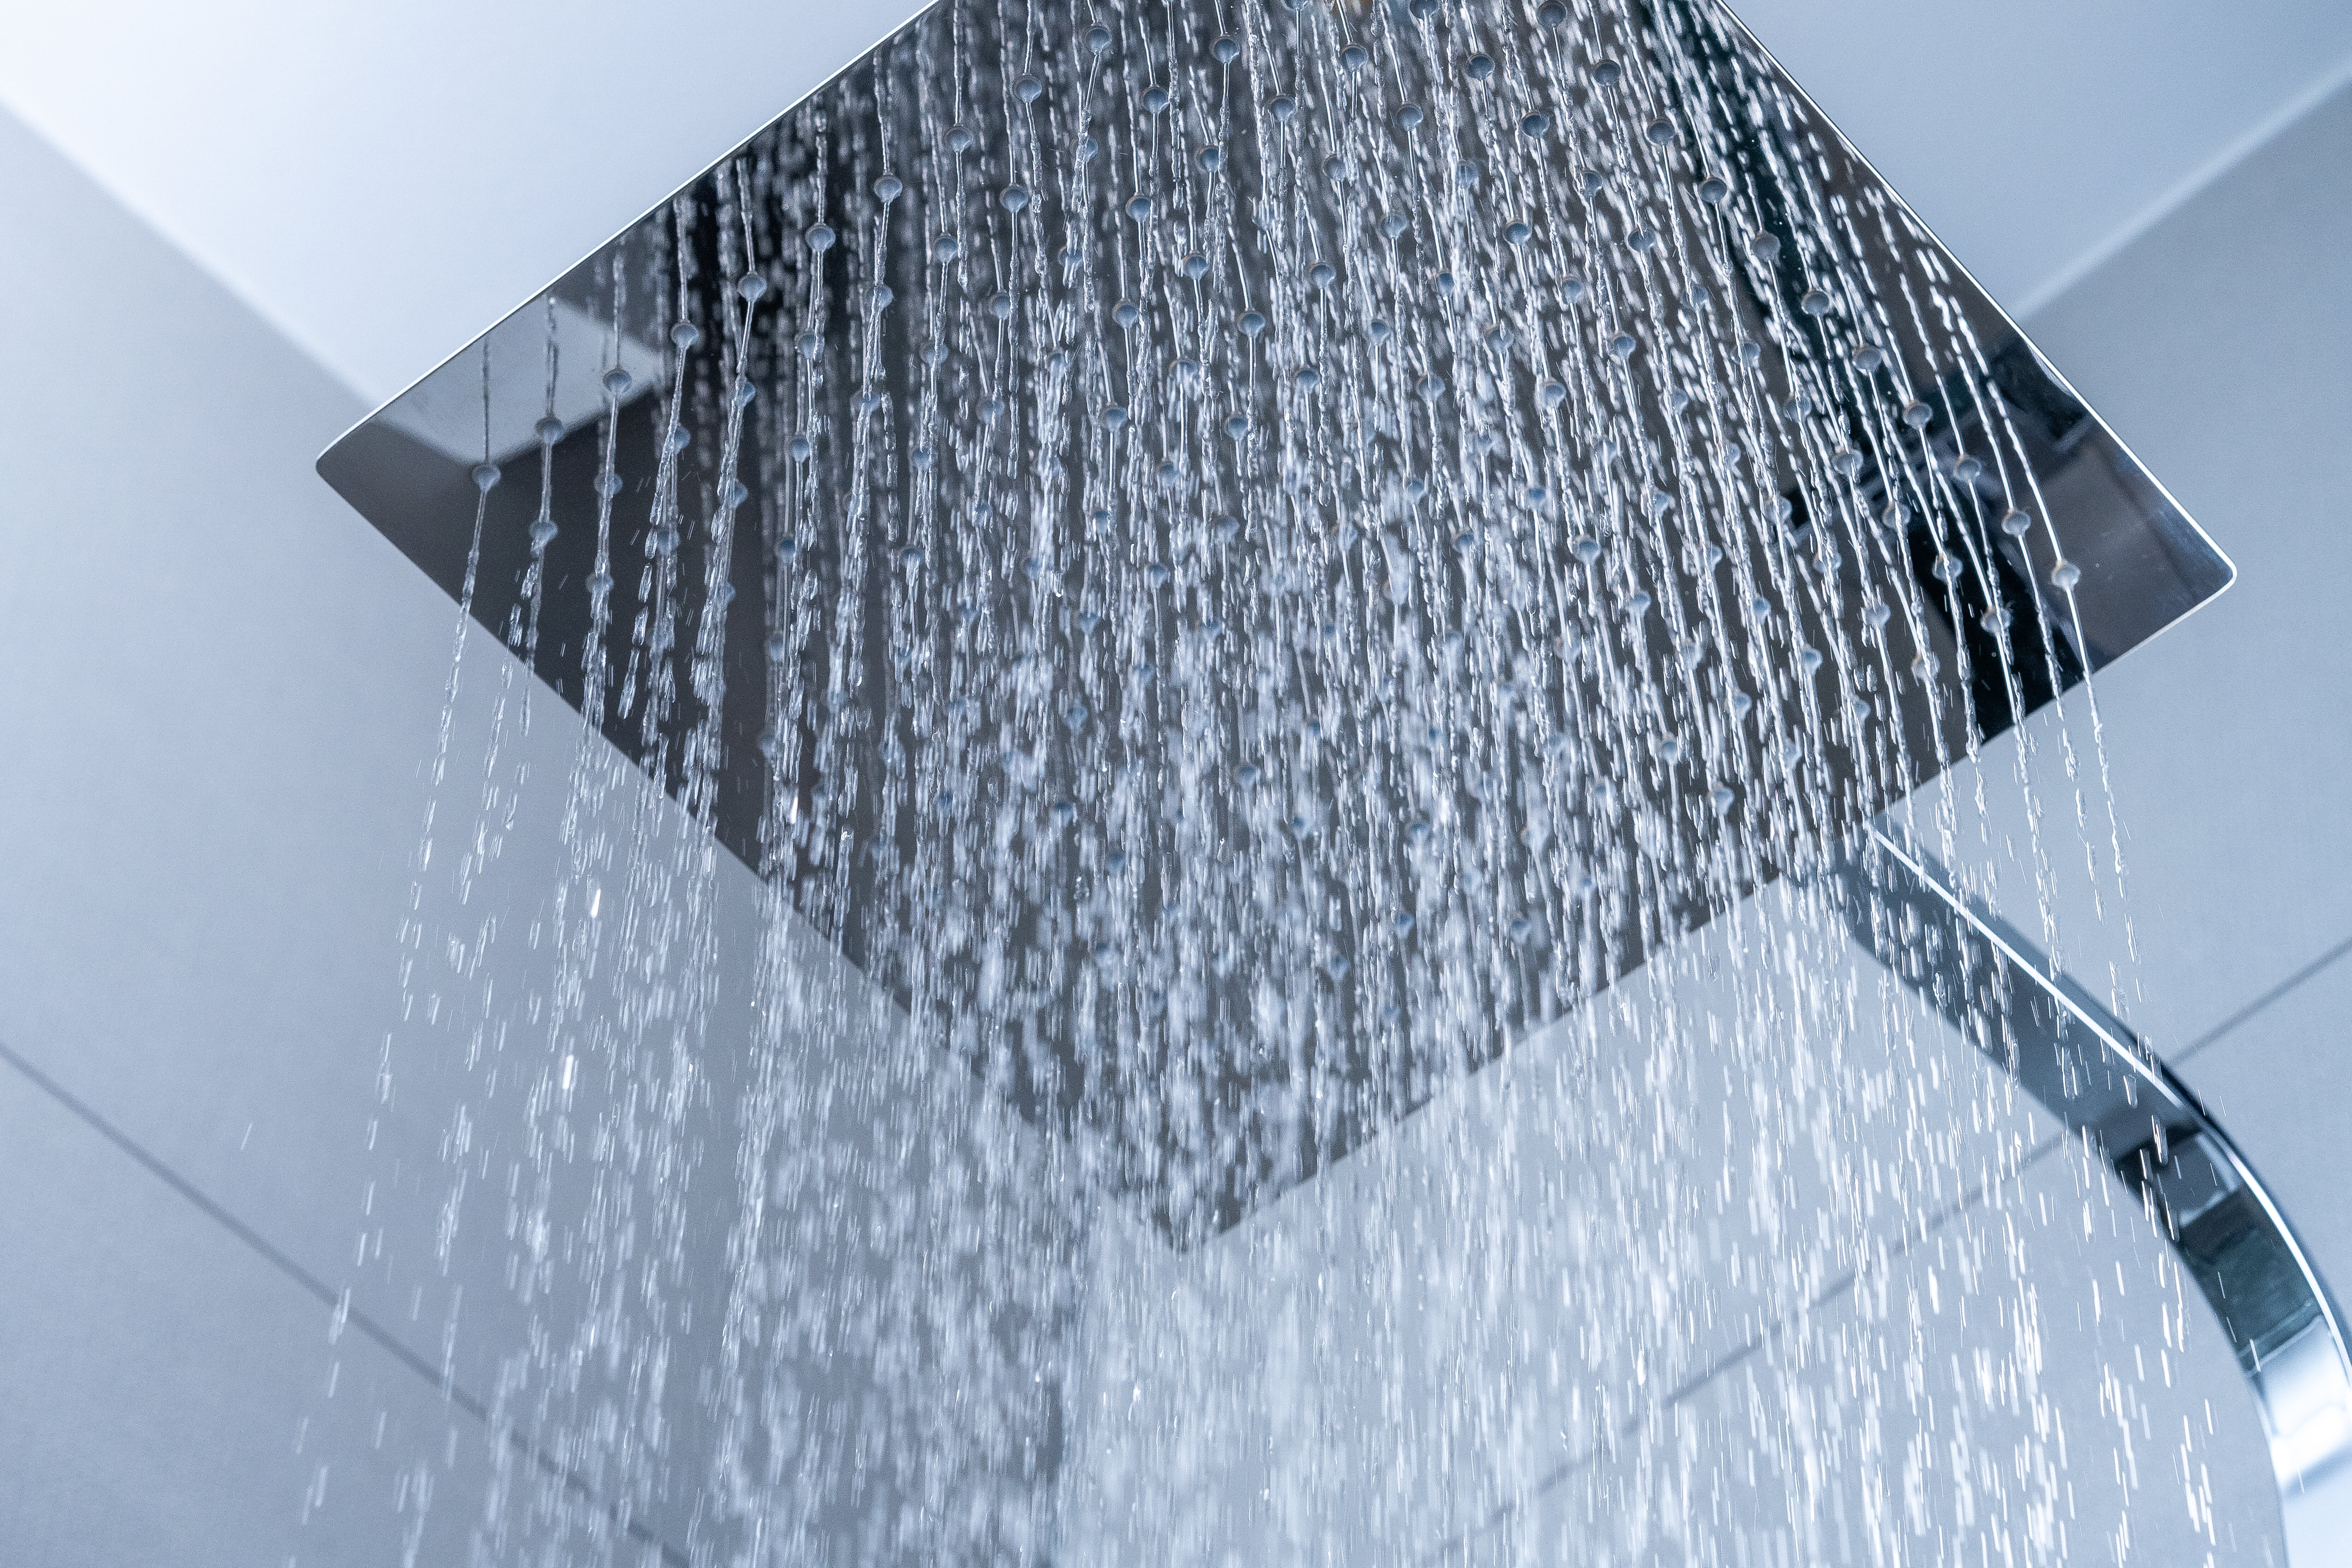 Water flowing from a square shower head against a blurred background